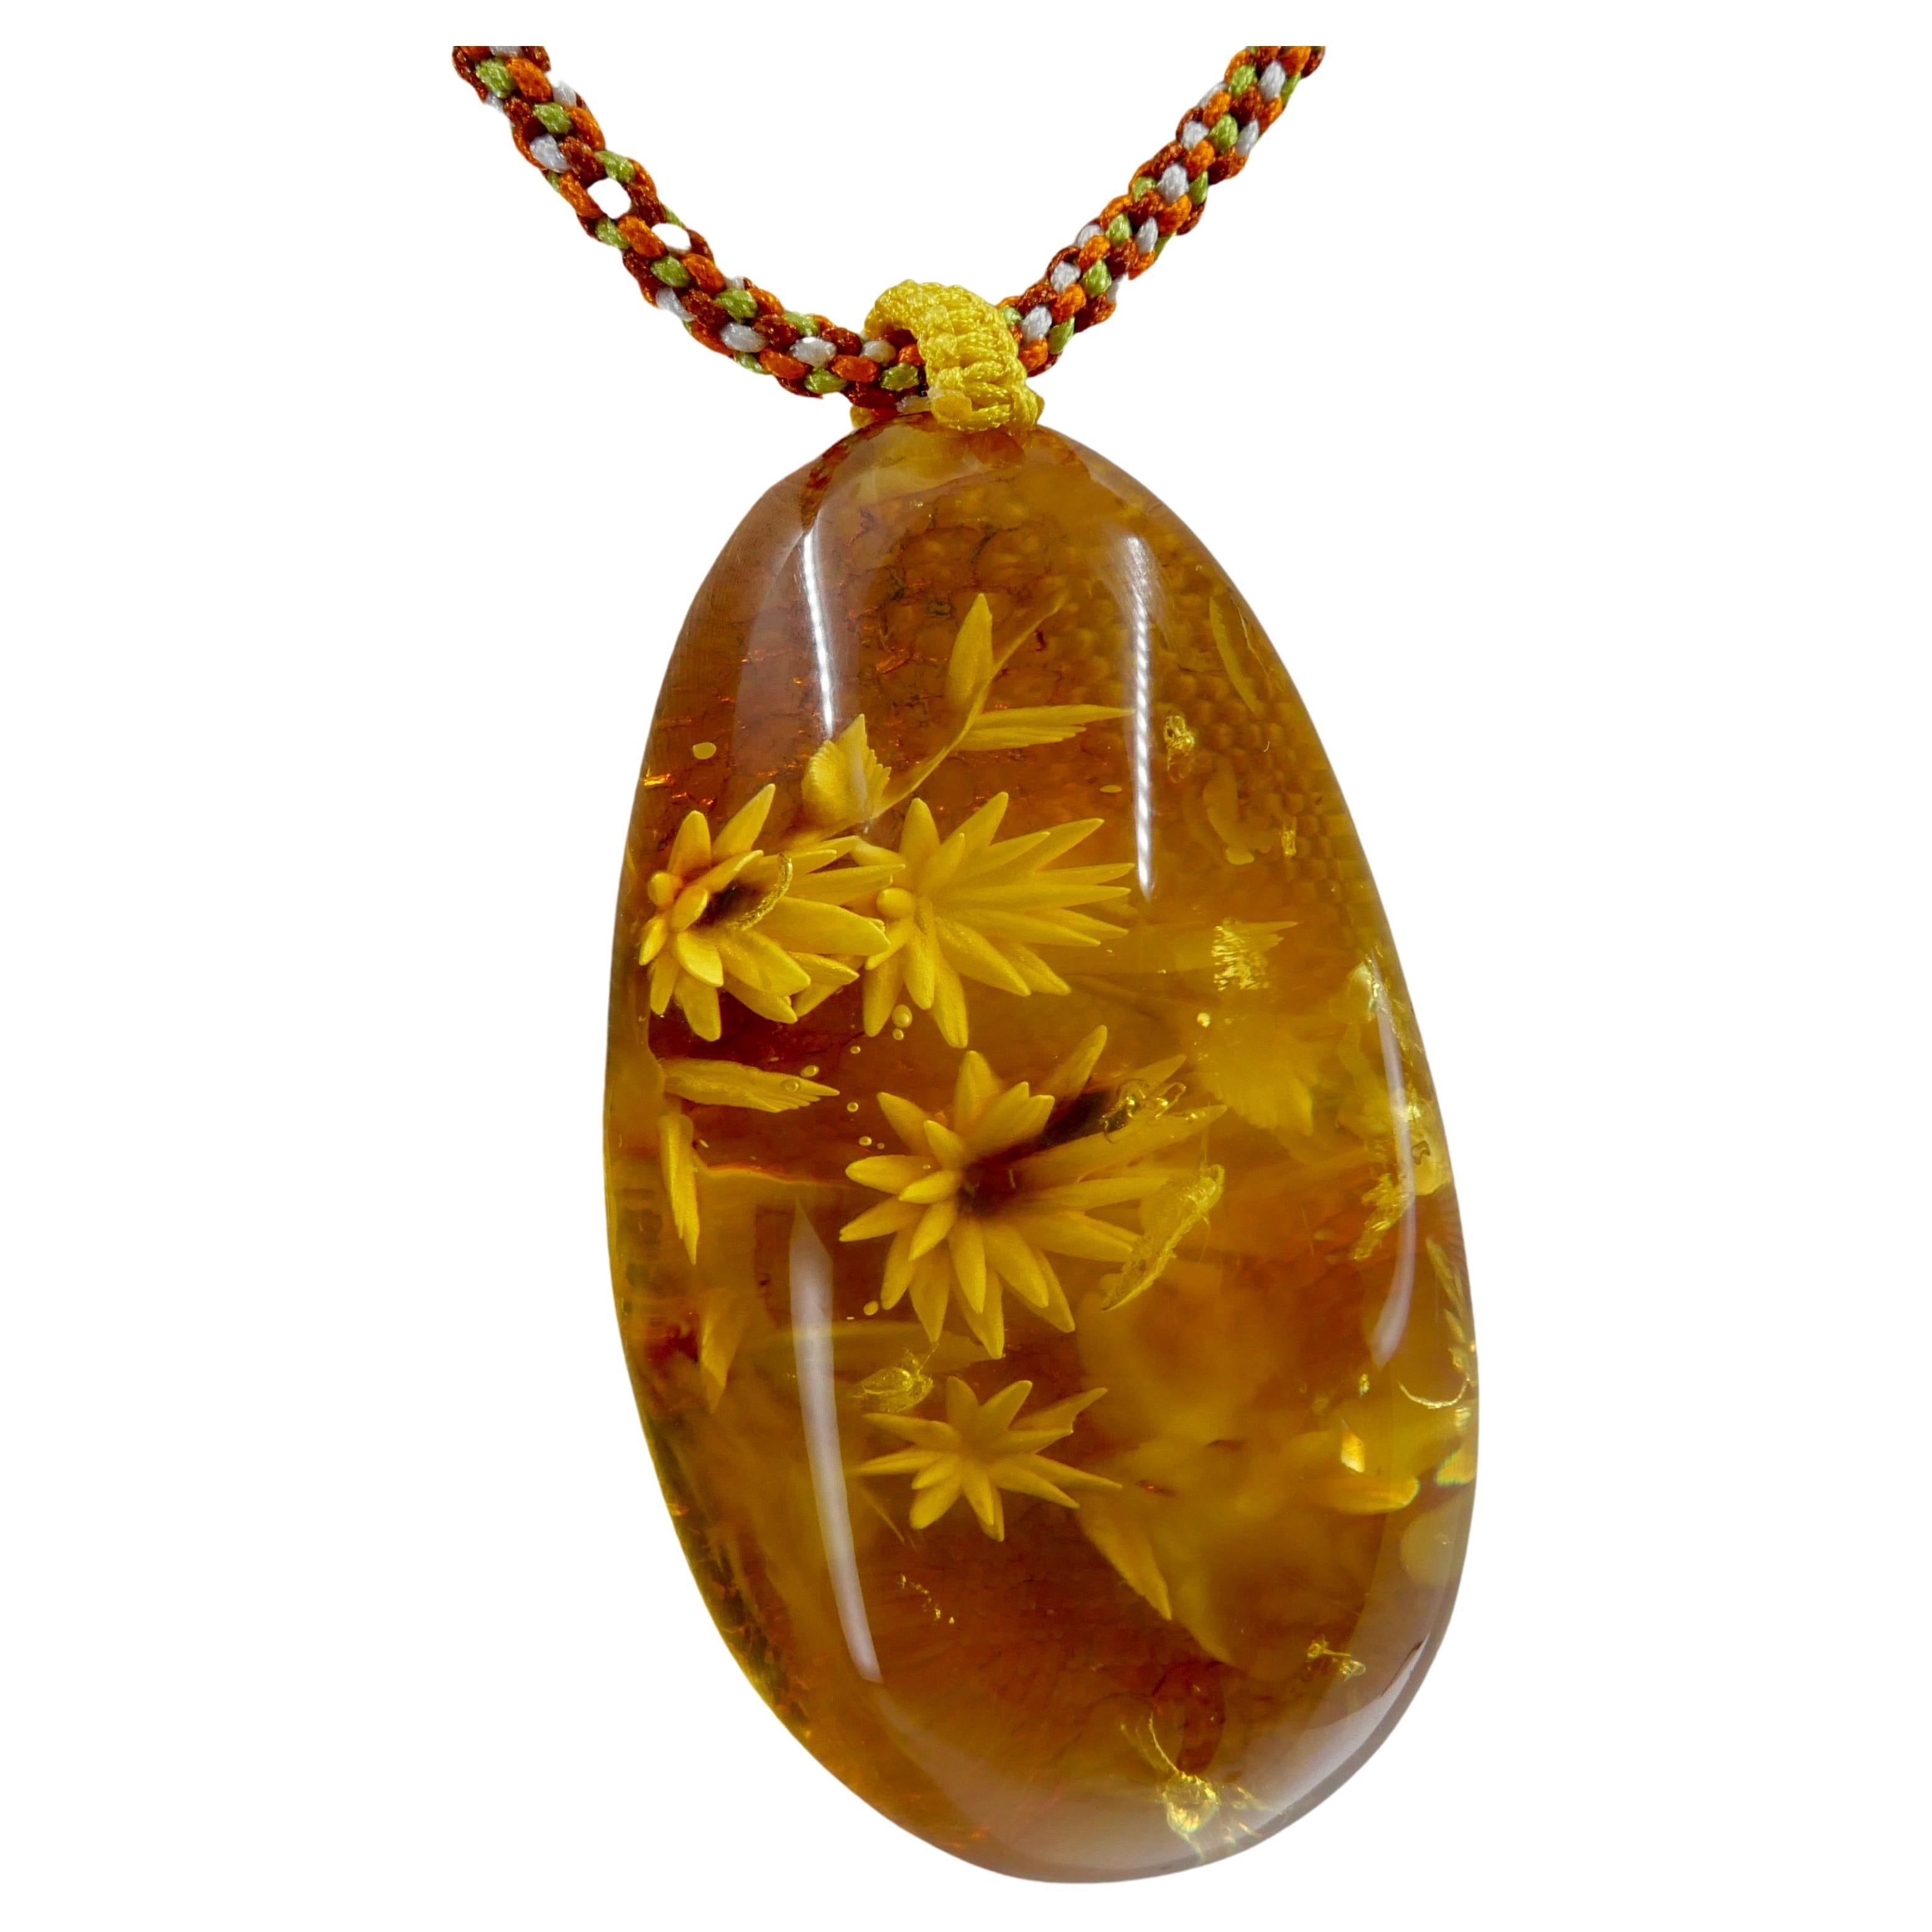 Certified 187 Carat Natural Amber Flower Pendant Necklace, Statement Jewelry For Sale